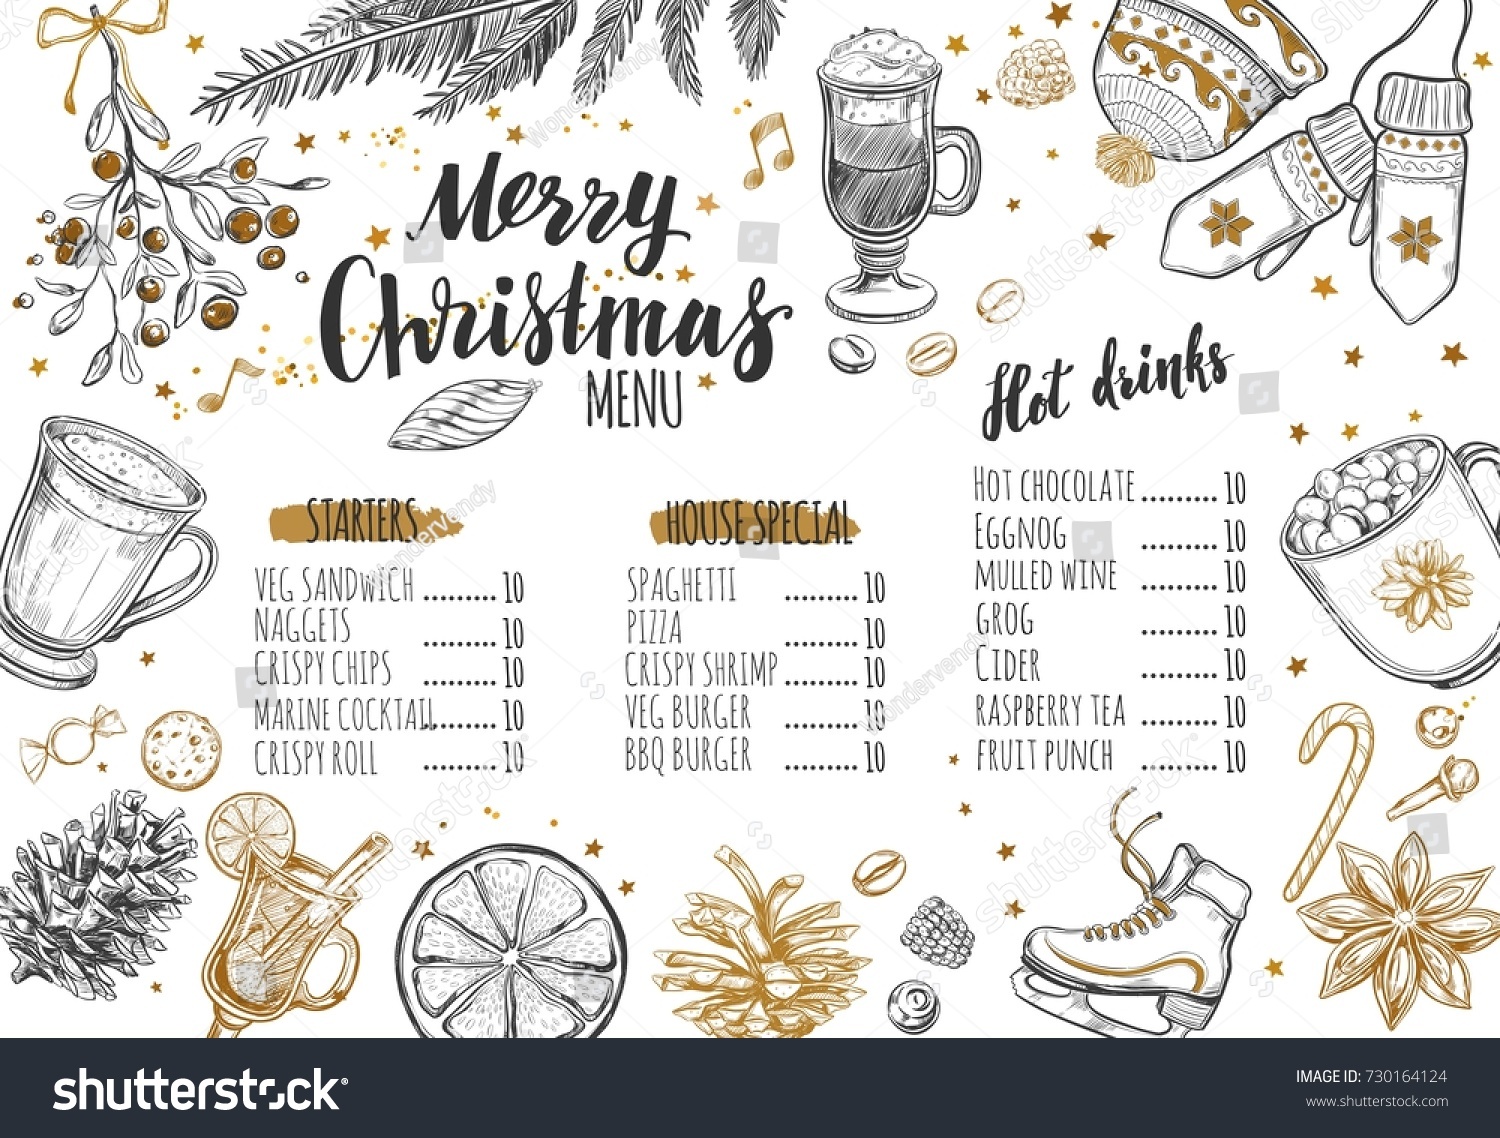 Merry Christmas festive Winter Menu. Design template includes different Vector hand drawn illustrations and Brushpen Modern Calligraphy. Beverages, food and christmas elements.  #730164124